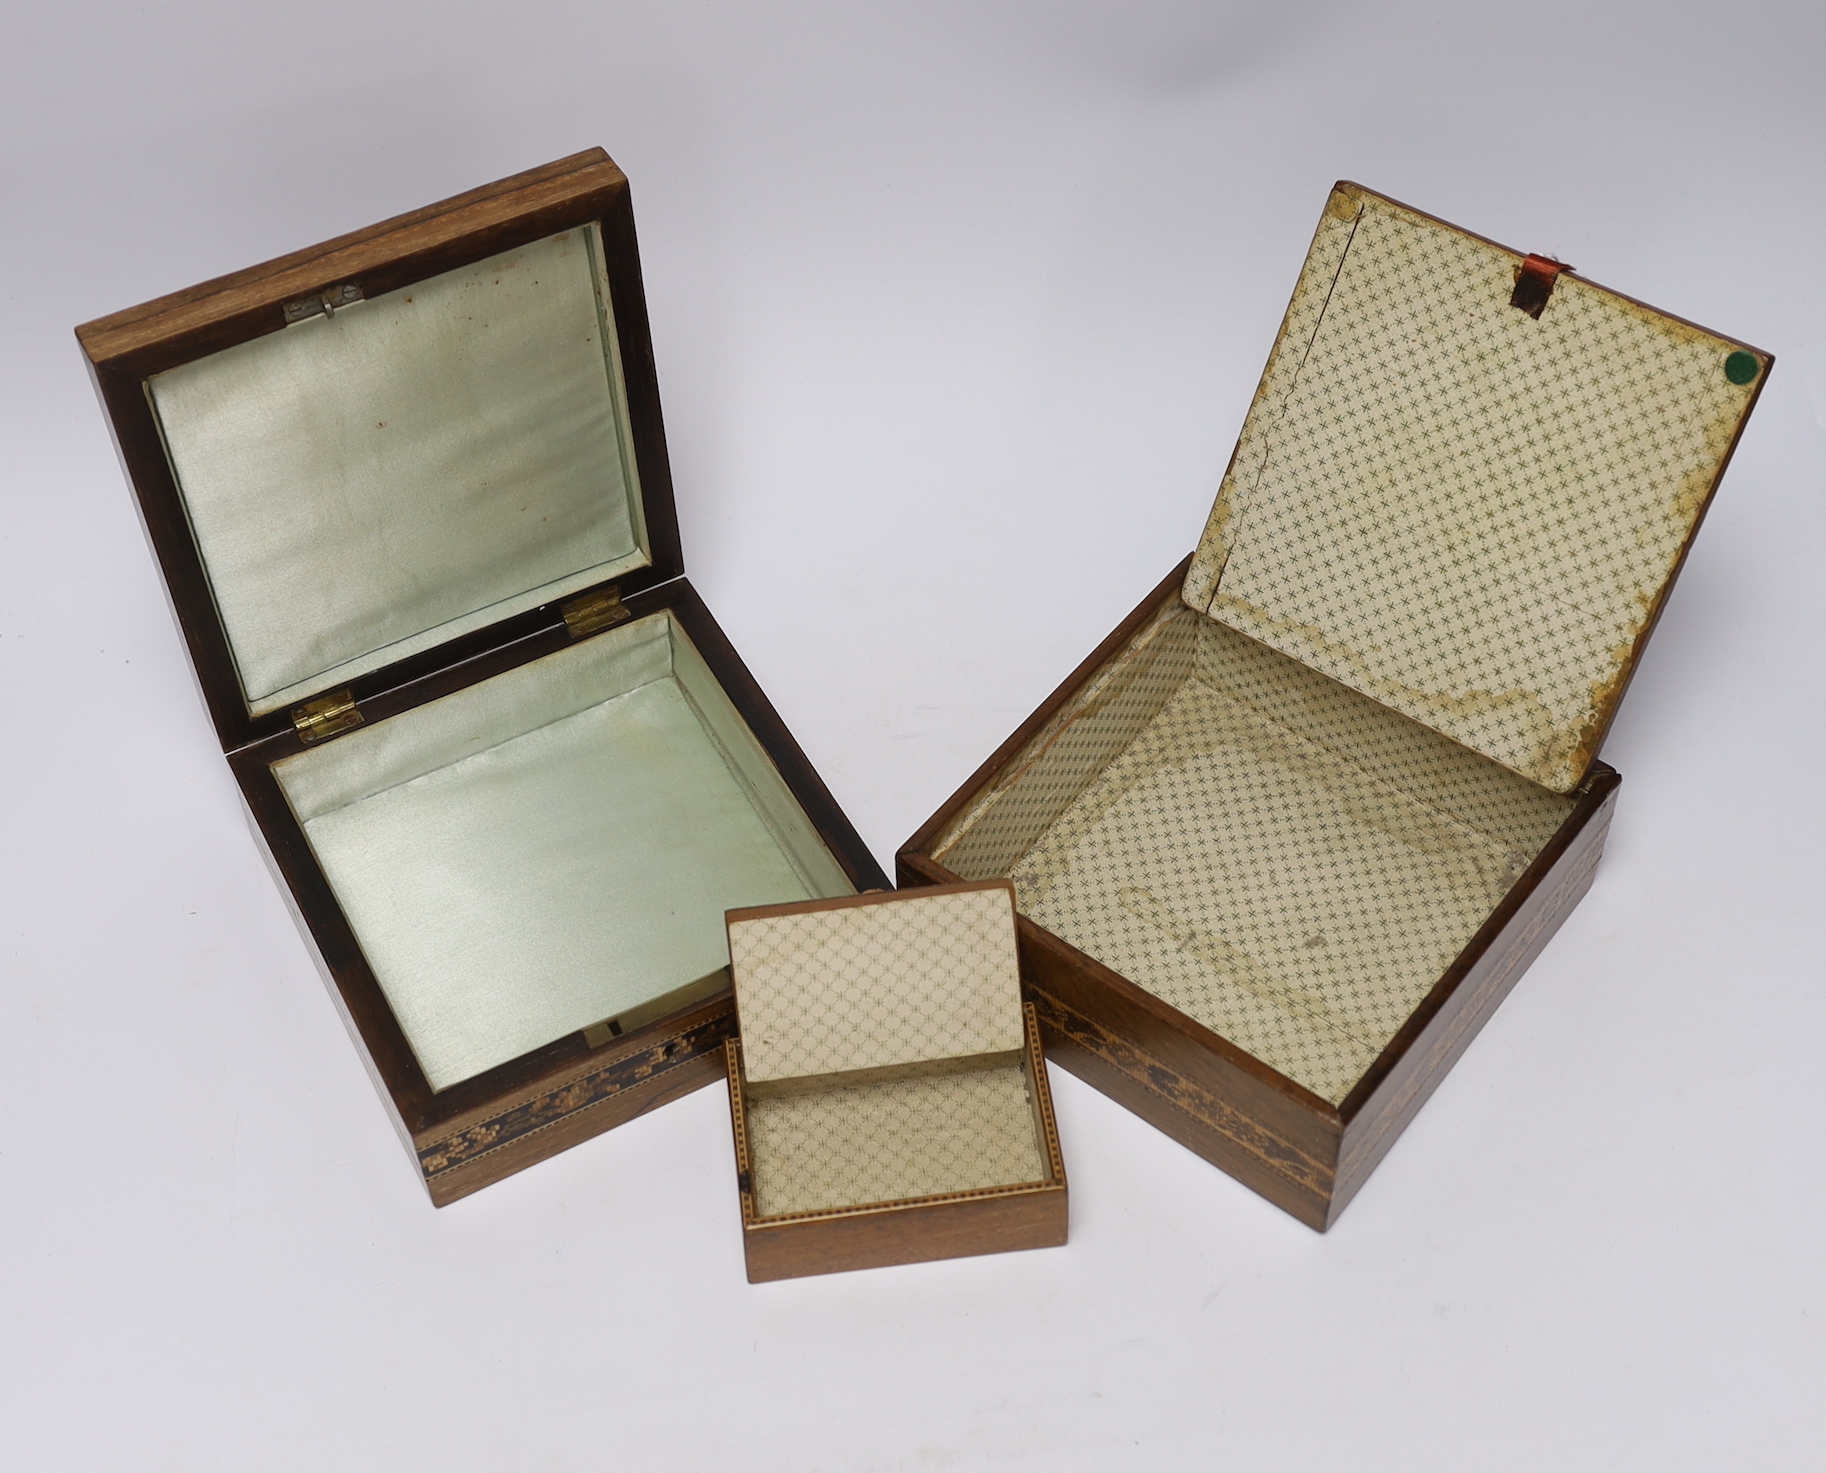 Three Tunbridgeware boxes, two decorated with perspective cube marquetry, the third with floral tesserae mosaic, largest 15.5cm